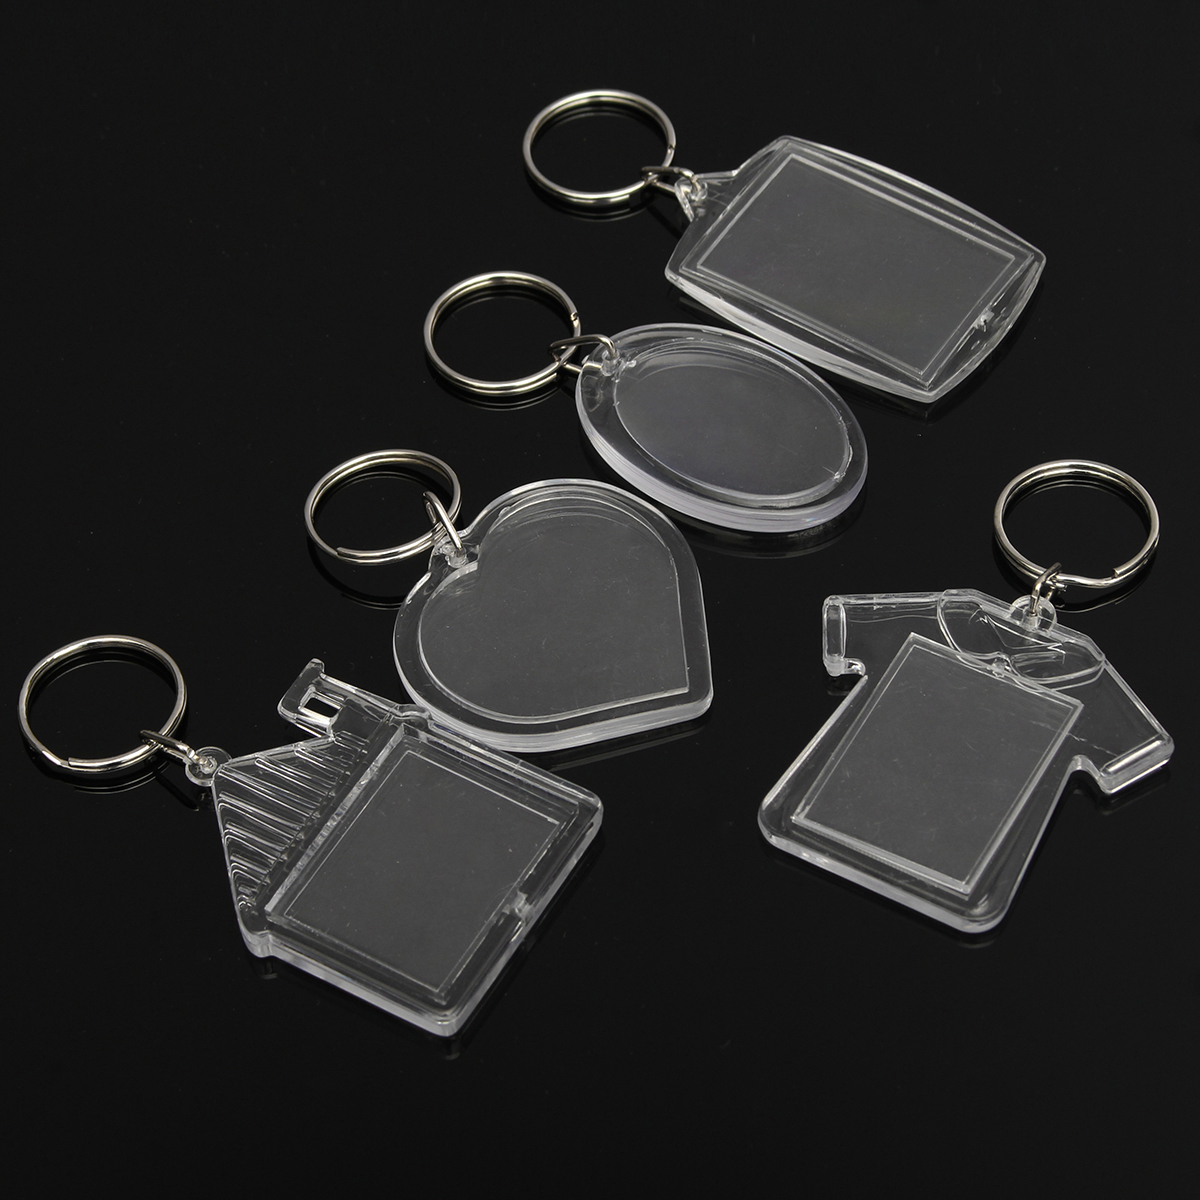 Photos-Pictures-Blank-Key-Ring-Duplex-Keychain-1036881-2